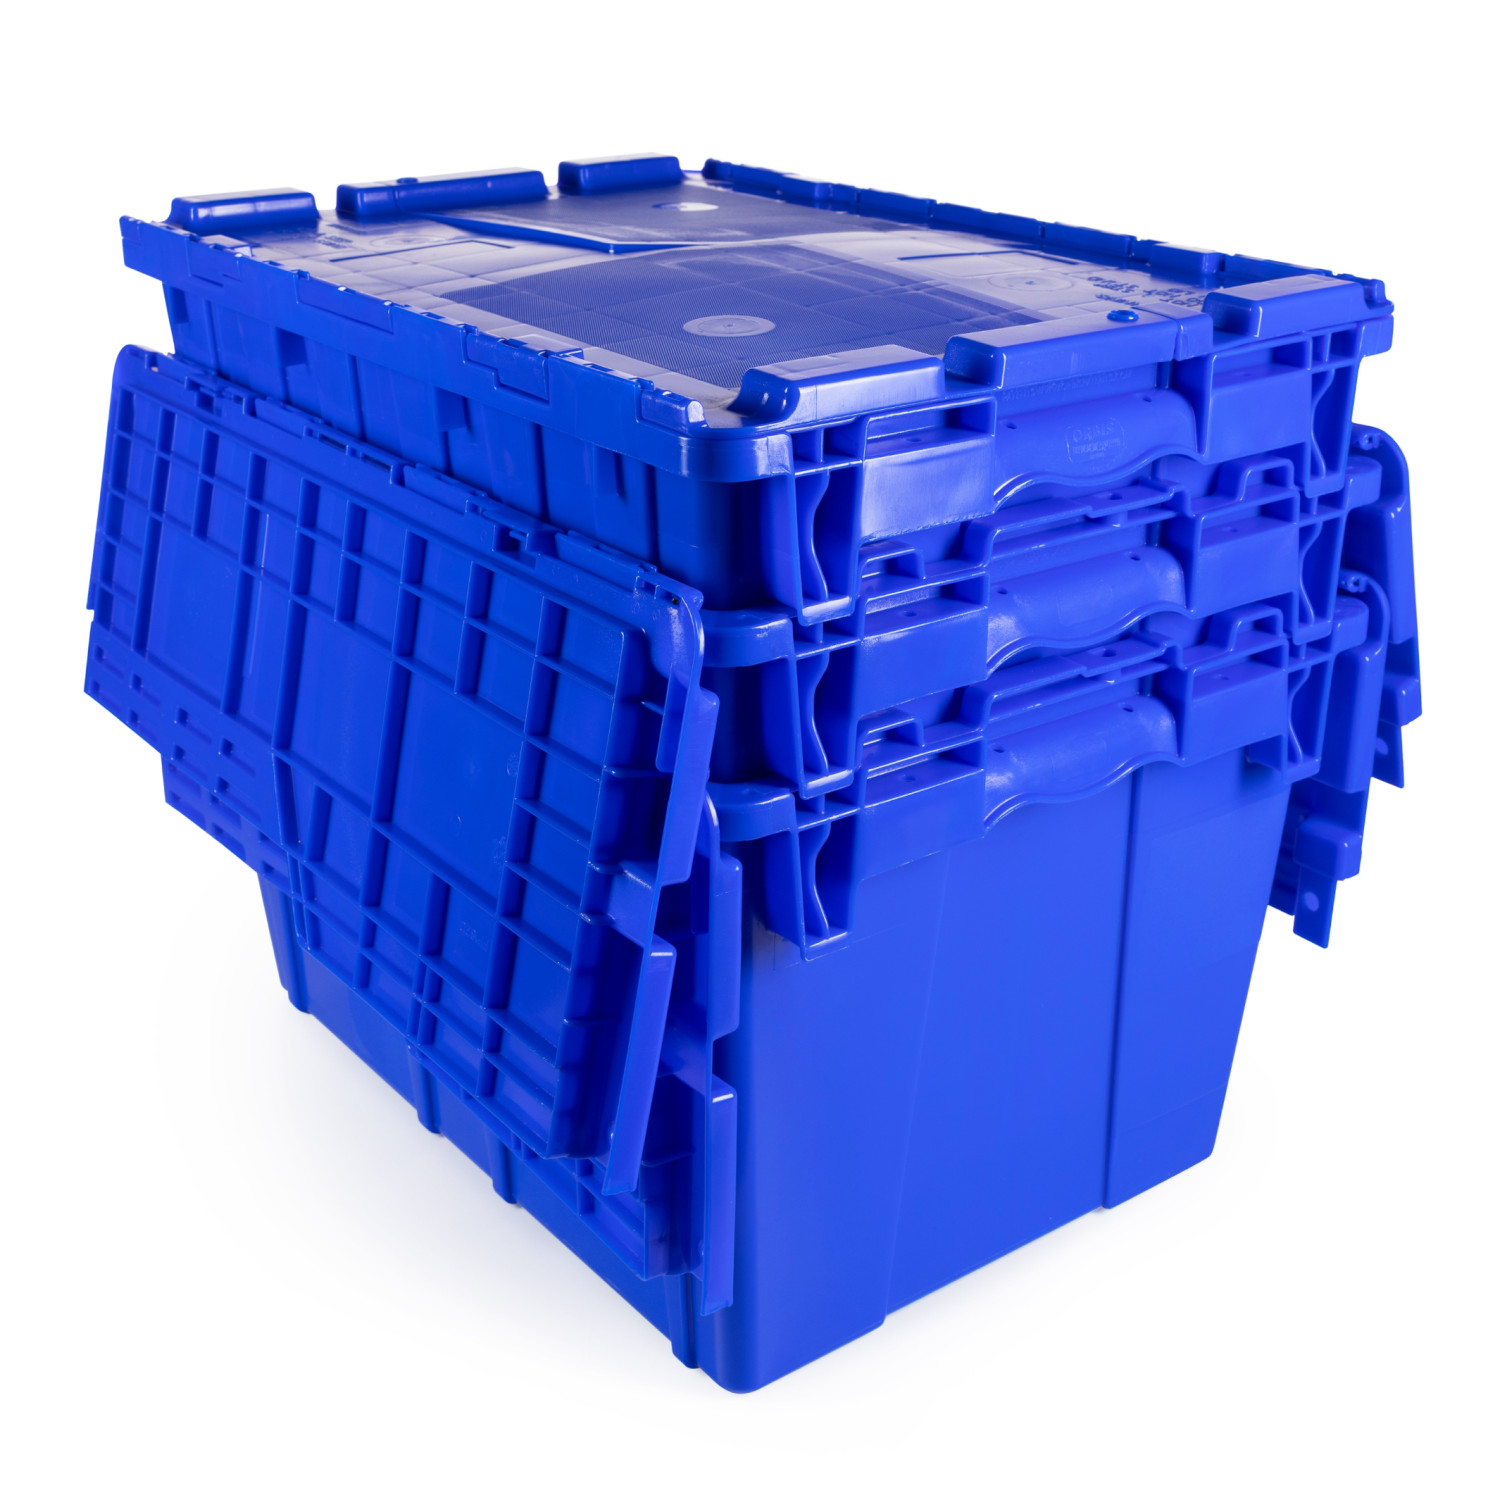 https://idlpack.com/image/cache/catalog/Products/Containers/2000x2000%20Blue%20Plastic%20Box%2021.5x15x12_white_bg%203%20-1500x1500.jpg